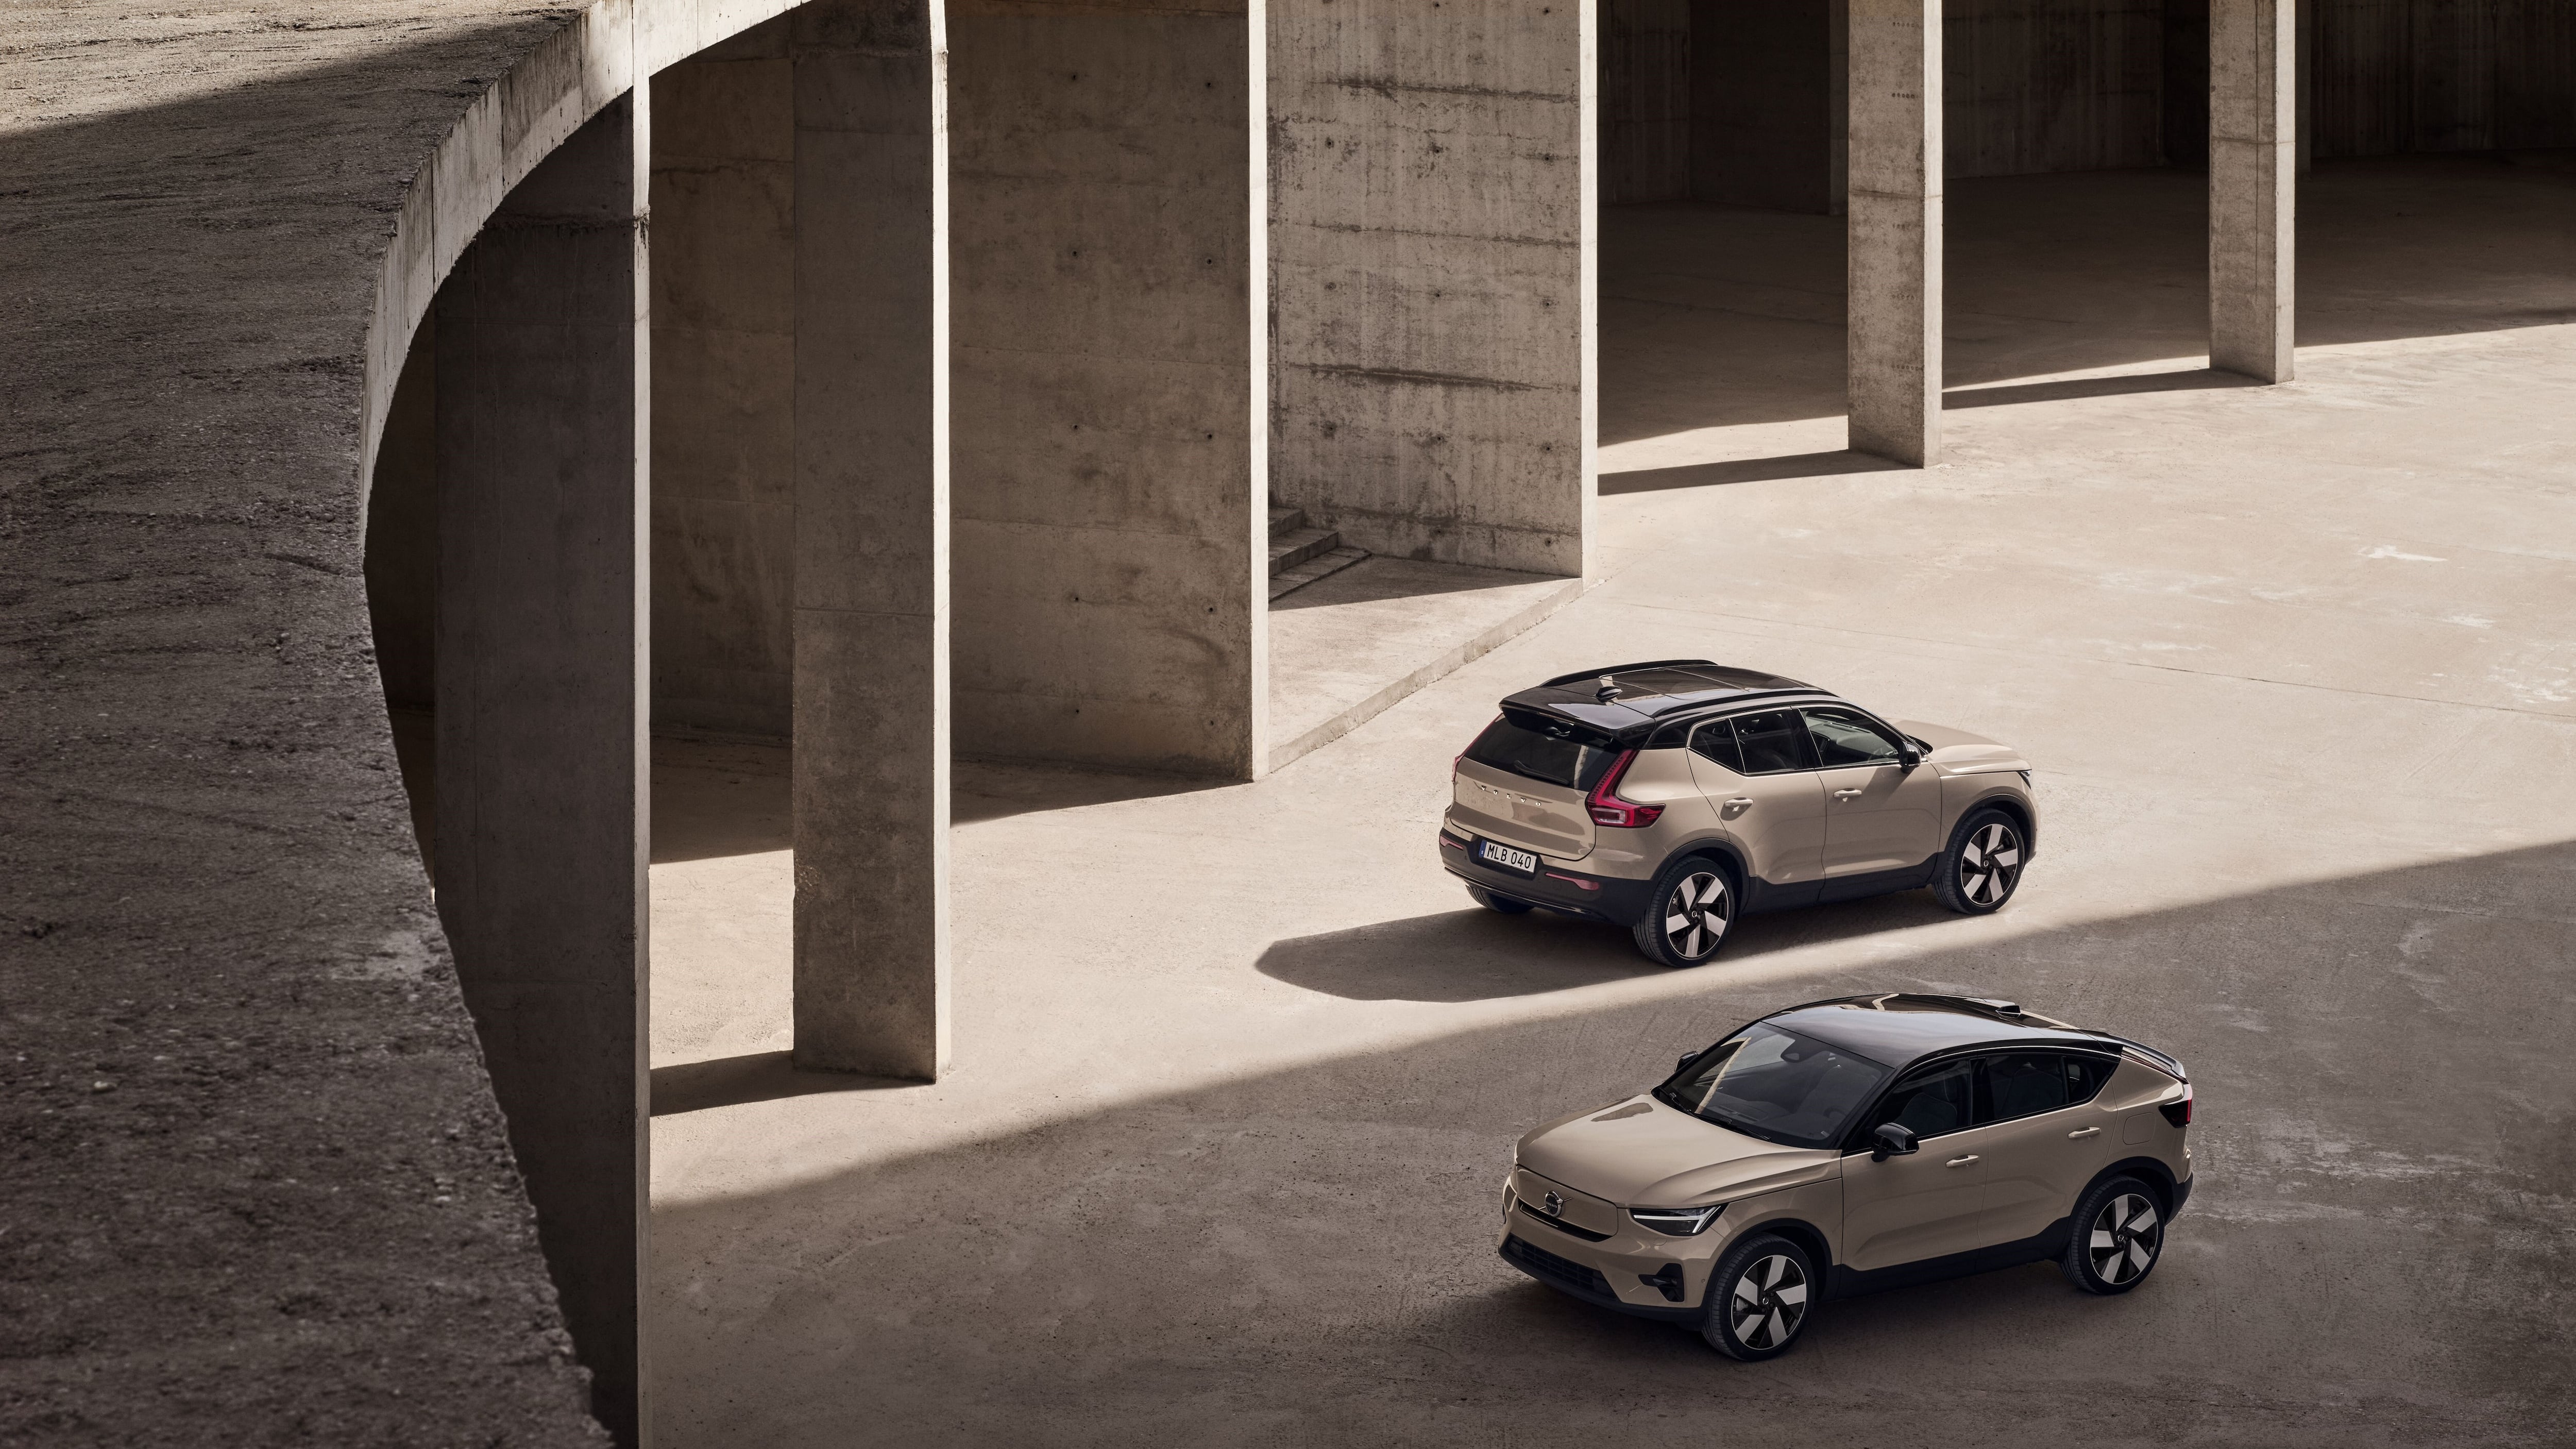 Volvo has updated its model range with new names, powertrains and revised prices. (Credit: Volvo media)